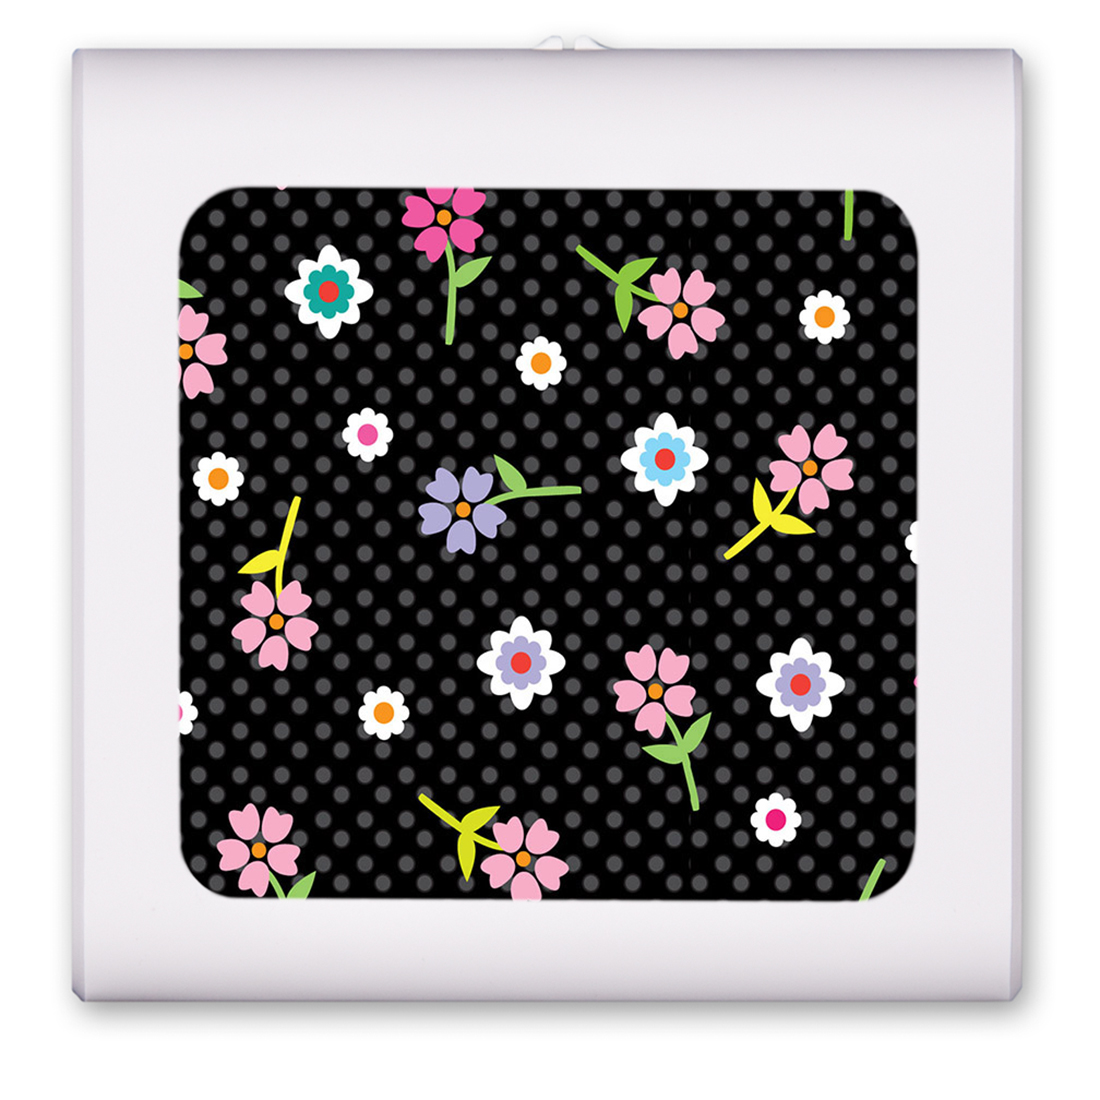 Flowers and Polka Dots - #850